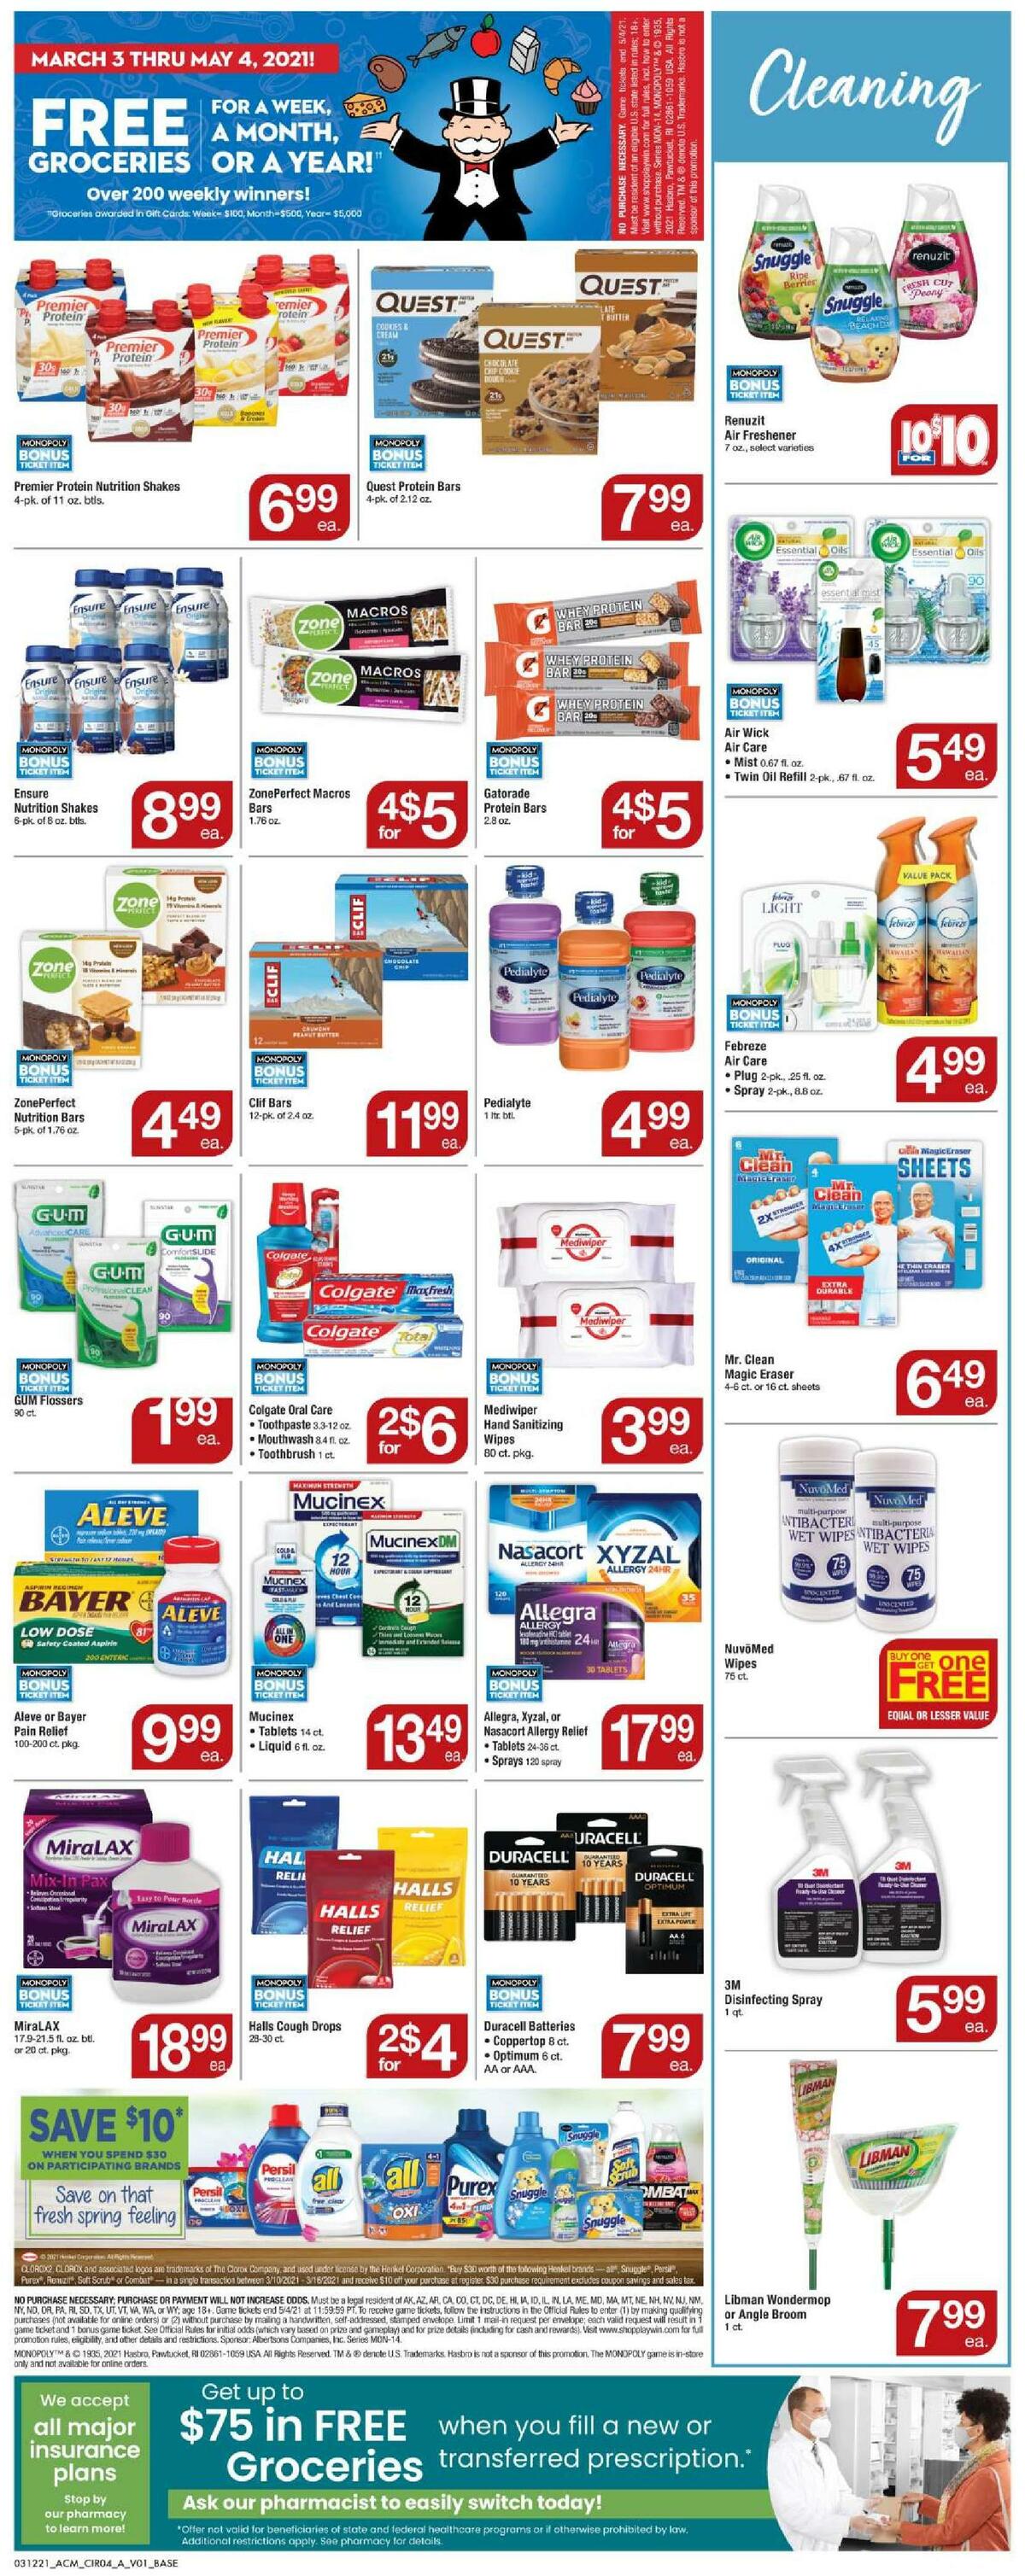 ACME Markets Weekly Ad from March 12